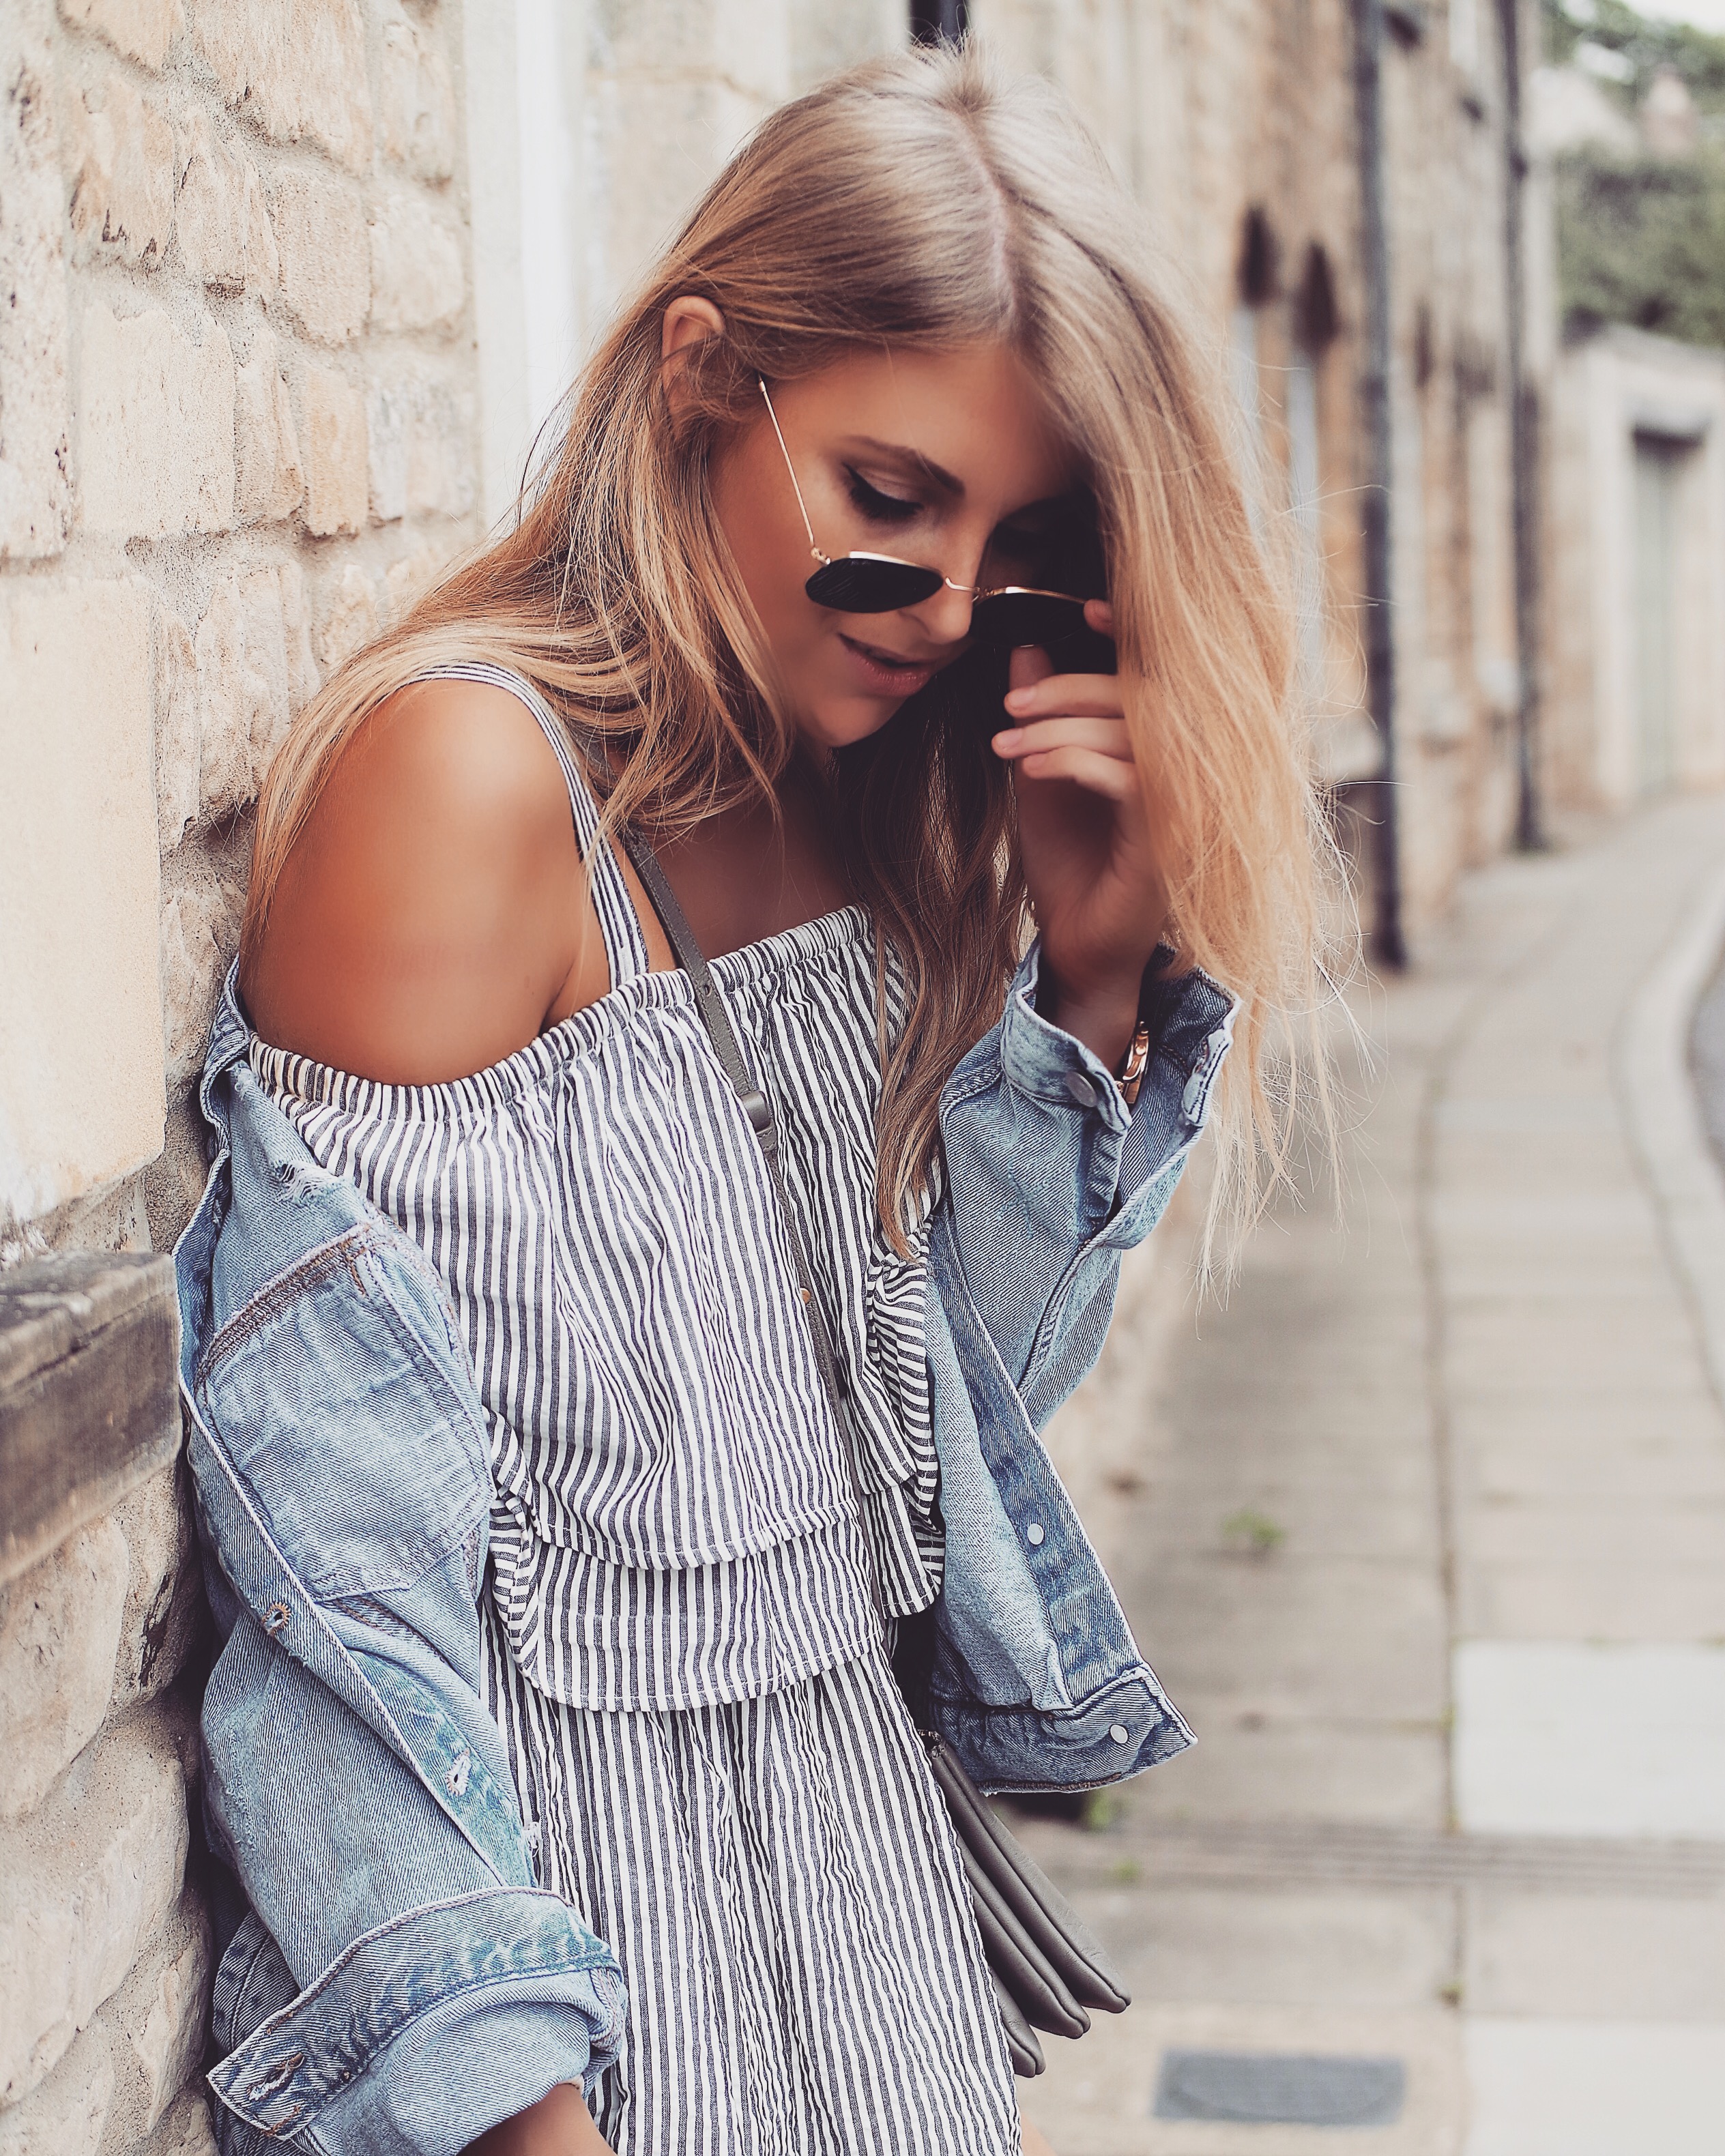 3 Tips For Putting Together Your Festival Look – Love Style Mindfulness –  Fashion & Personal Style Blog